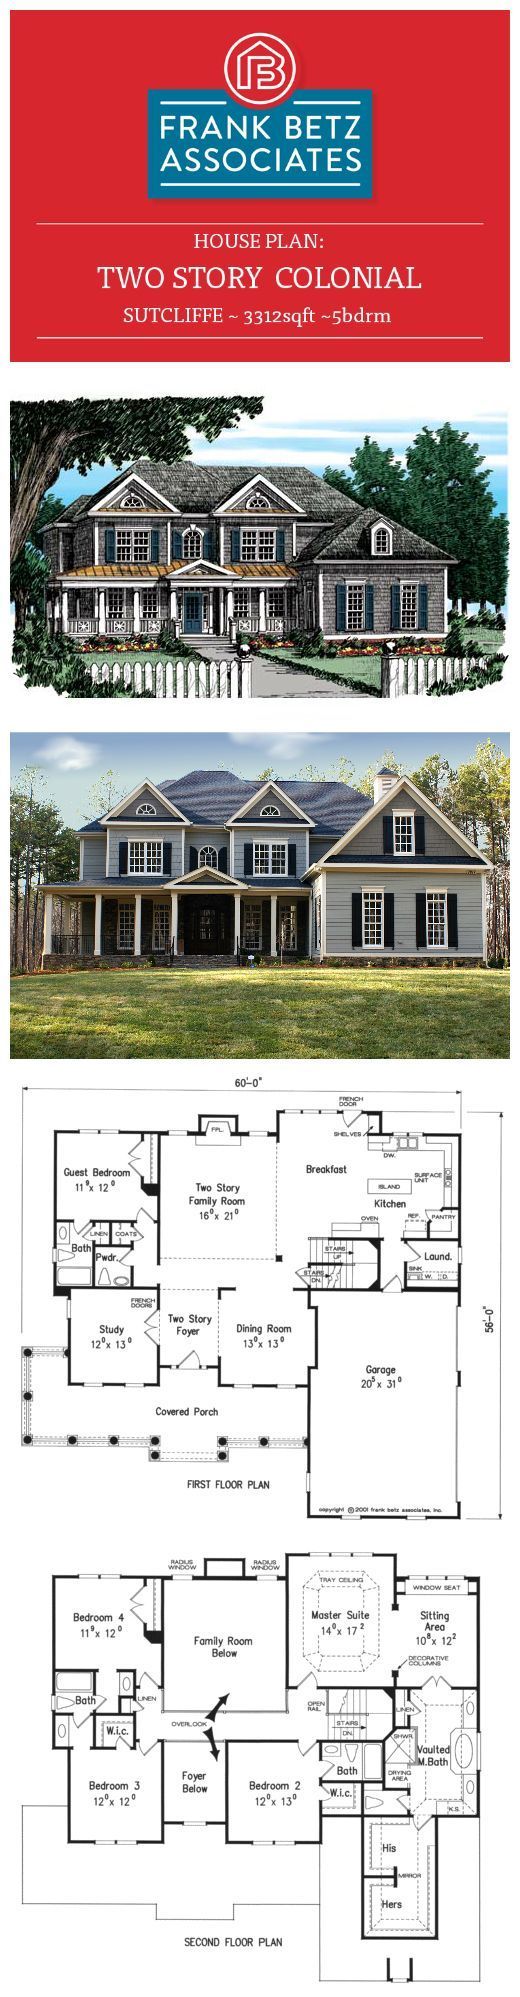 Sutcliffe: 3312sqft|5bdrm two-story Colonial house plan by Frank Betz Associates Inc.  ~ Great pin! For Oahu architectural design